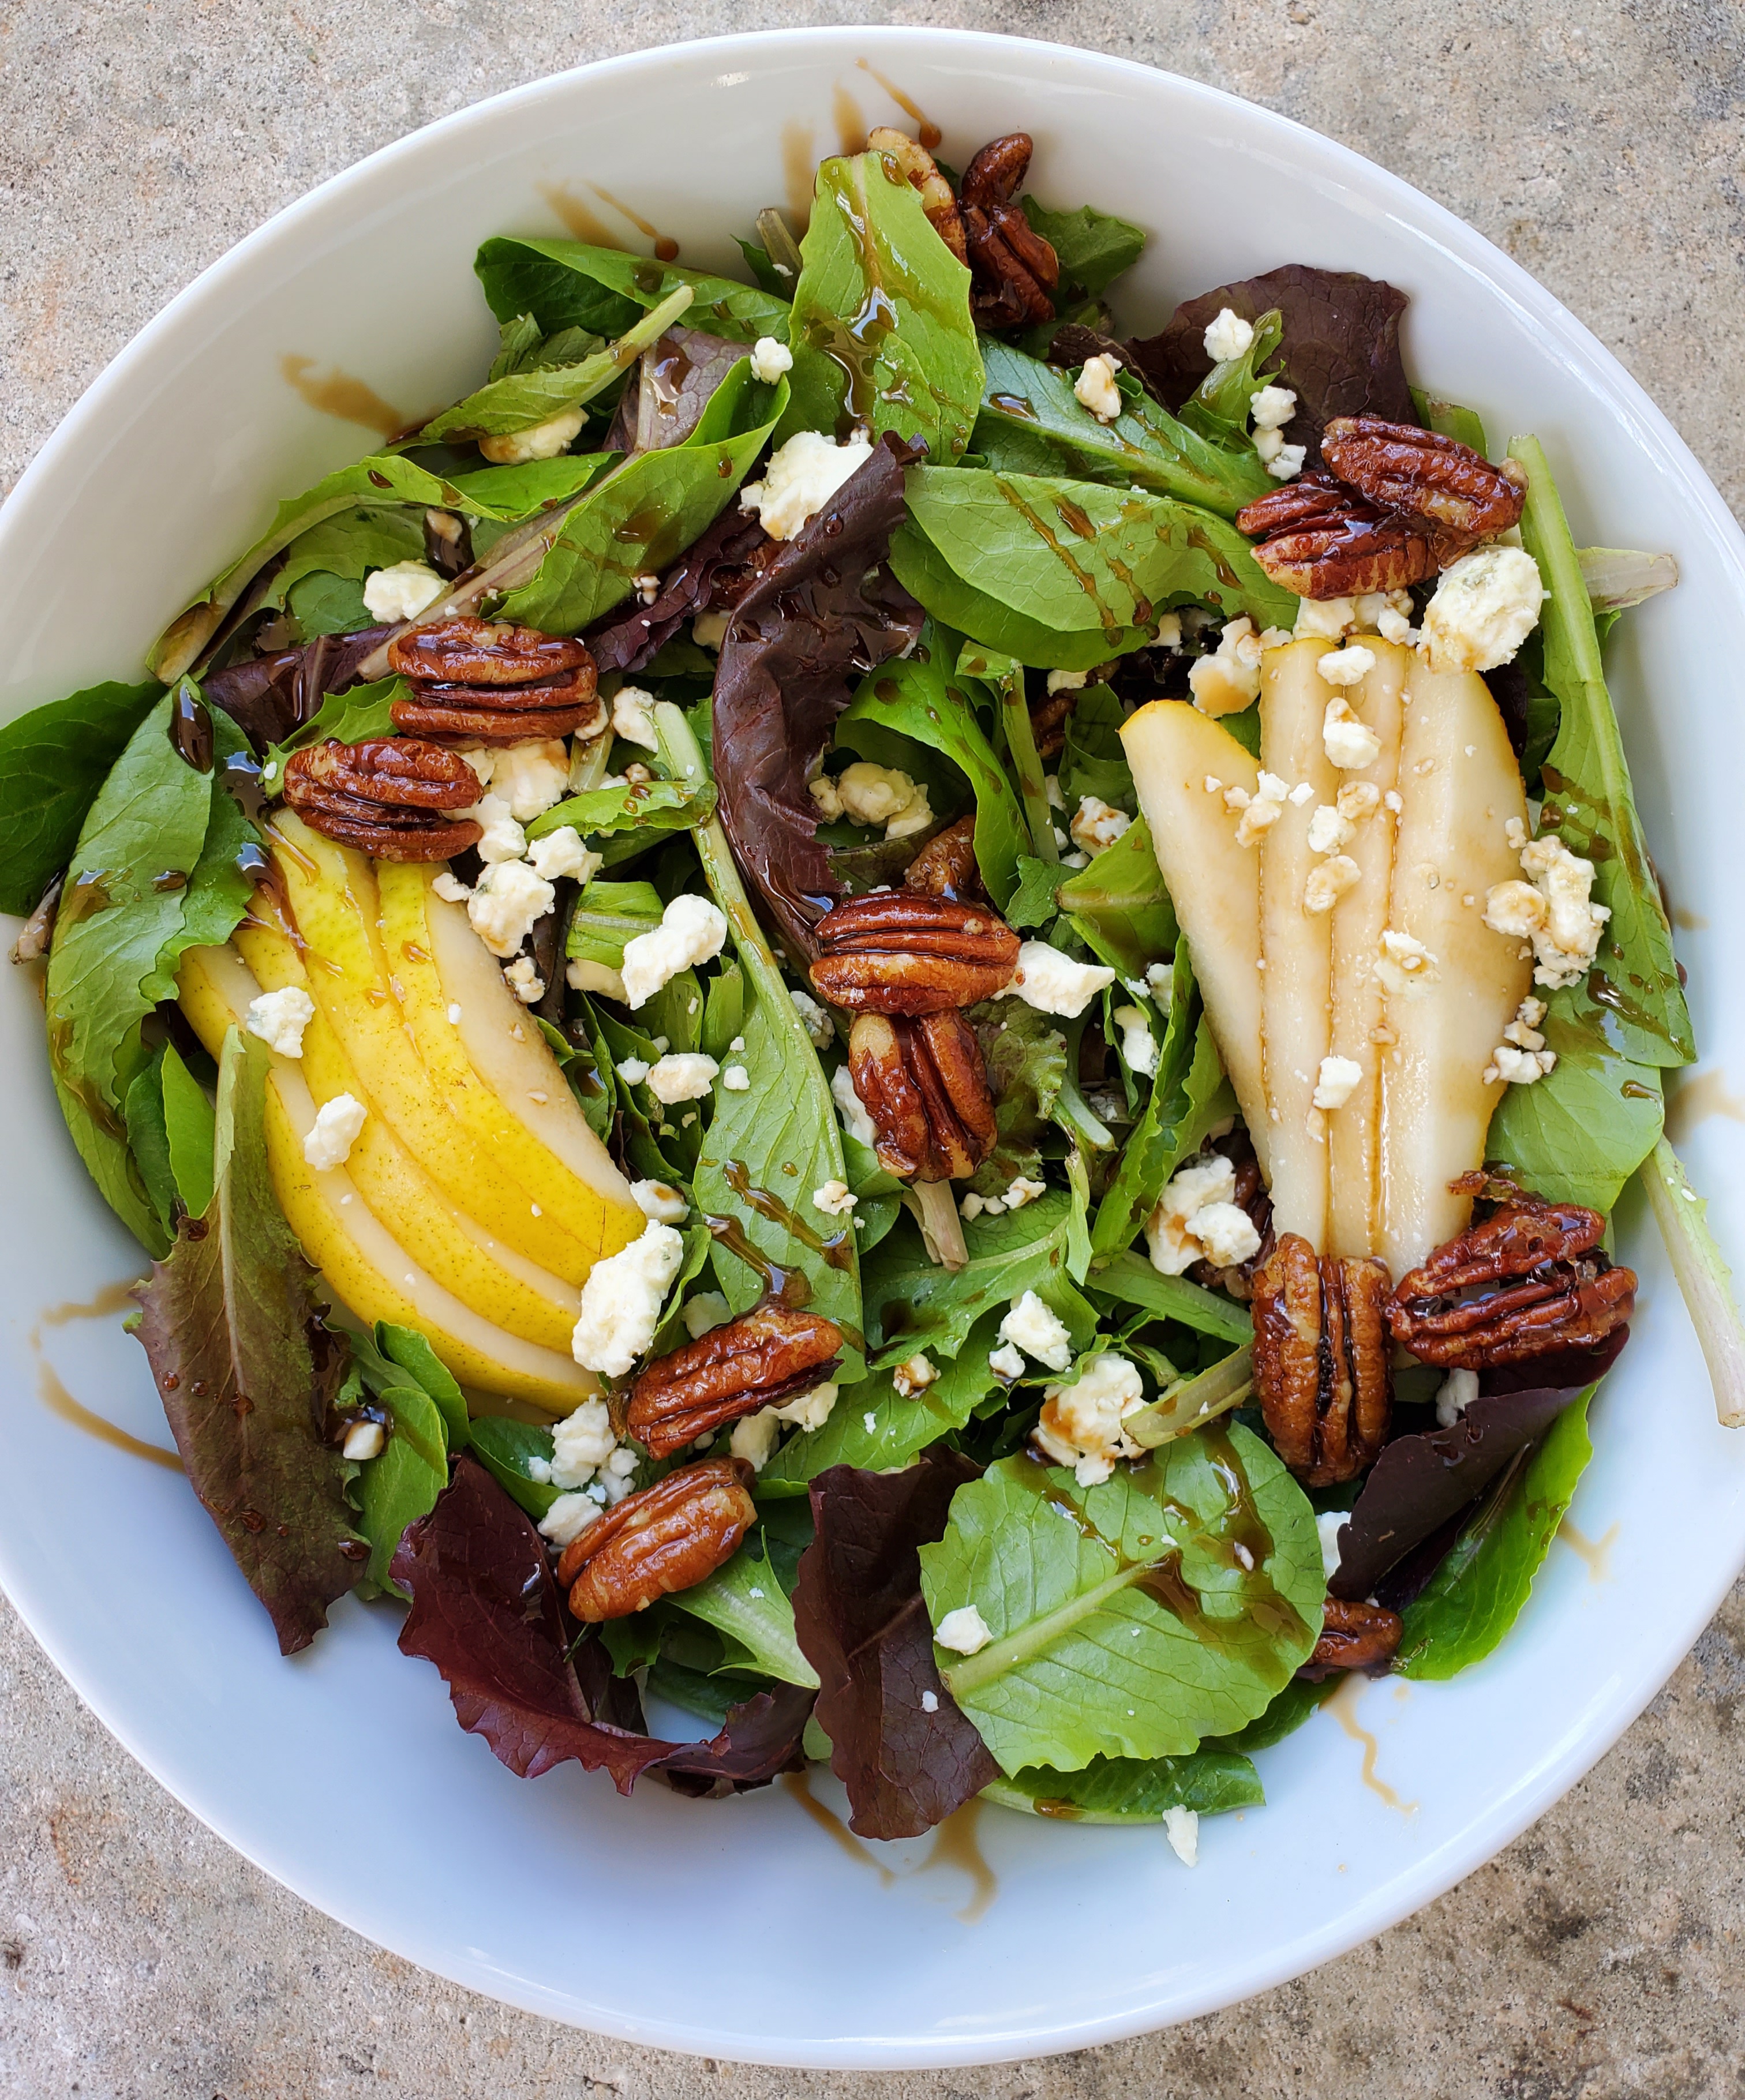 Mixed greens with maple glazed pecans, crumbled blue cheese, and balsamic vinaigrette